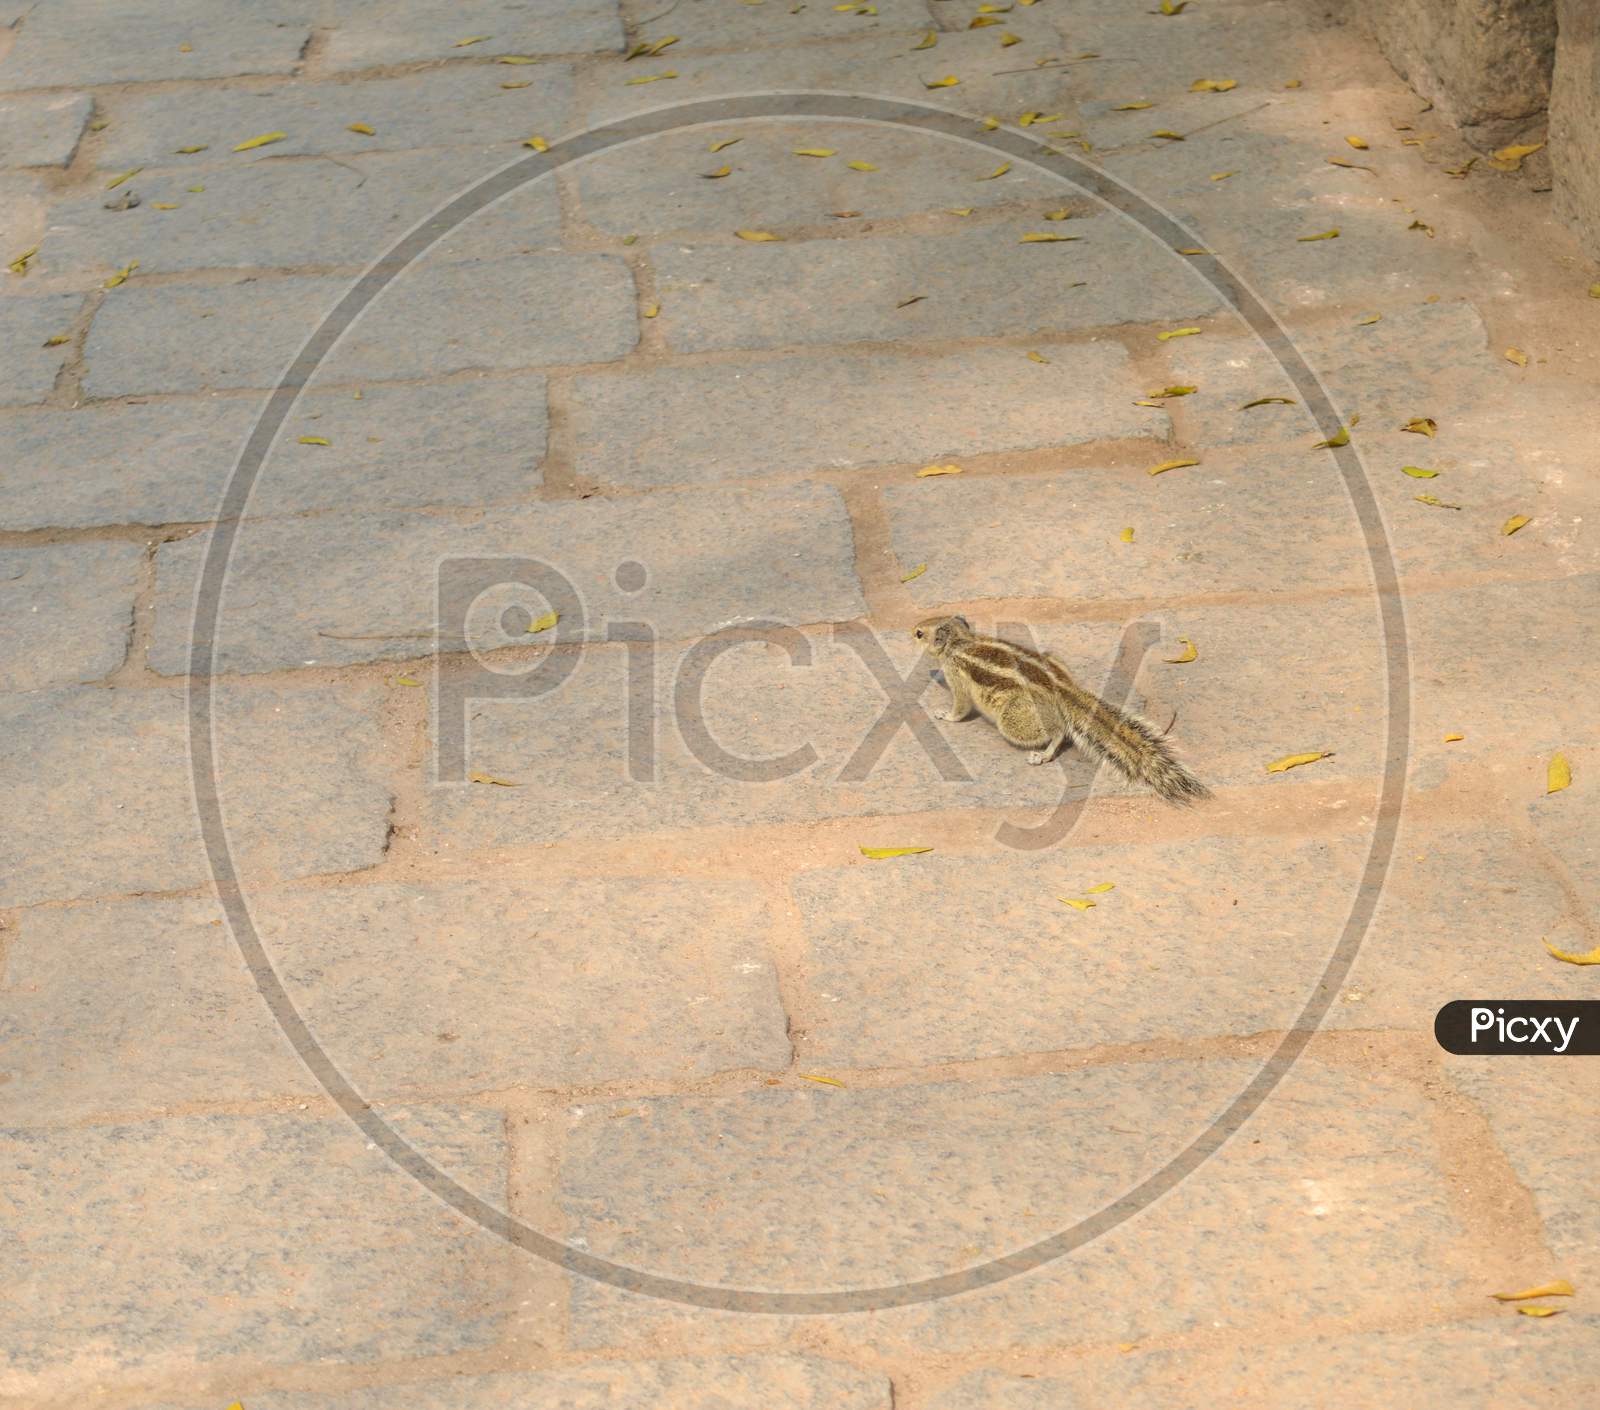 A Small Squirrel Playing At Garden Of Hauz Khas Lake And Garden From The Hauz Khas Fort At Hauz Khas Village At Winter Foggy Morning.